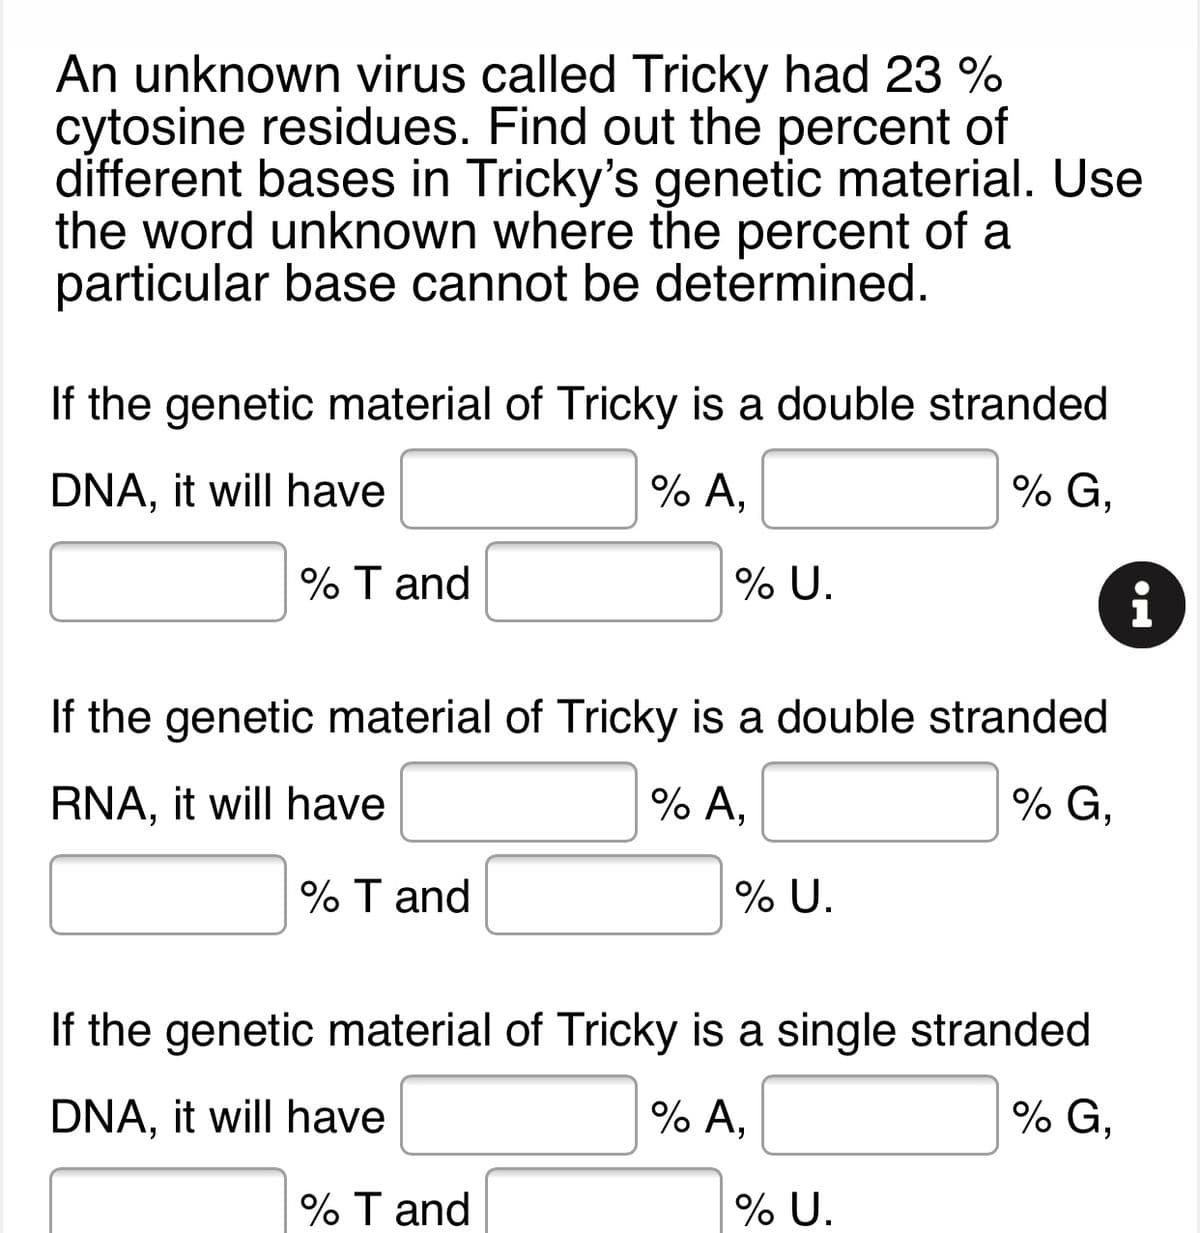 An unknown virus called Tricky had 23 %
cytosine residues. Find out the percent of
different bases in Tricky's genetic material. Use
the word unknown where the percent of a
particular base cannot be determined.
If the genetic material of Tricky is a double stranded
% G,
% A,
DNA, it will have
% T and
% U.
i
If the genetic material of Tricky is a double stranded
% G,
% A,
RNA, it will have
% T and
% U.
If the genetic material of Tricky is a single stranded
% G,
% A,
DNA, it will have
% T and
% U.
